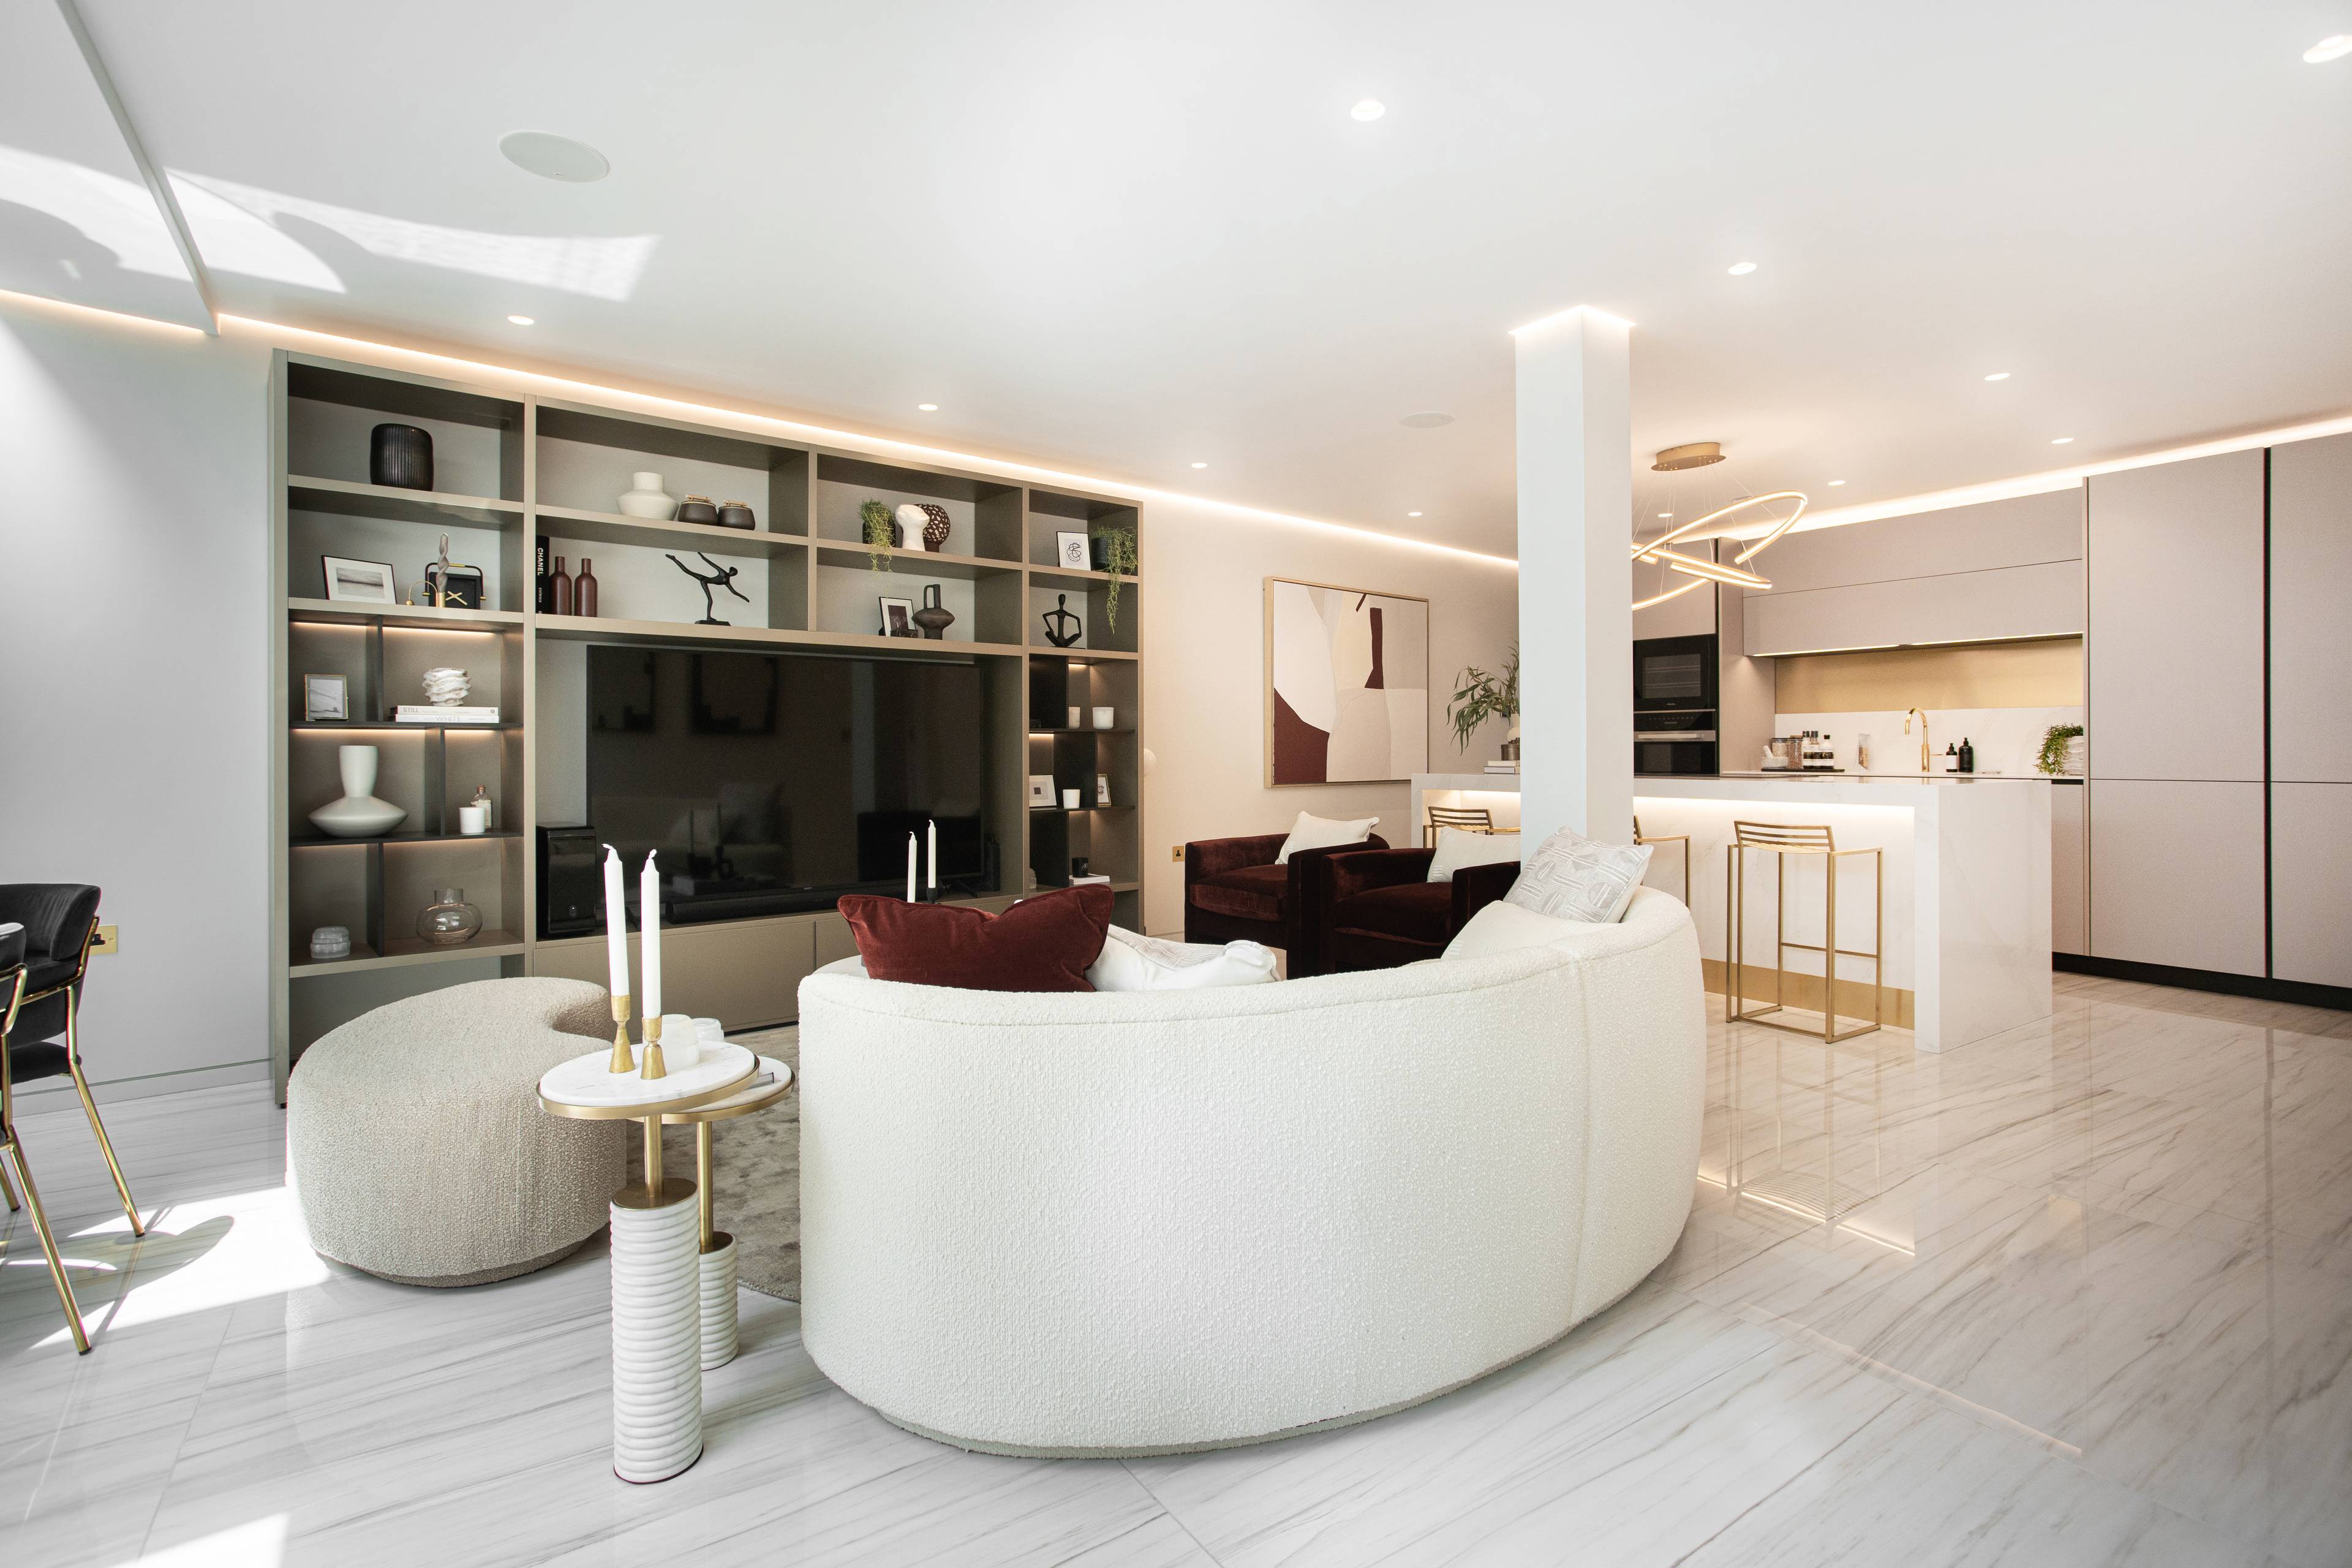 Brand new contemporary three-bedroom triplex apartment located moments from Bond Street in London's Mayfair.